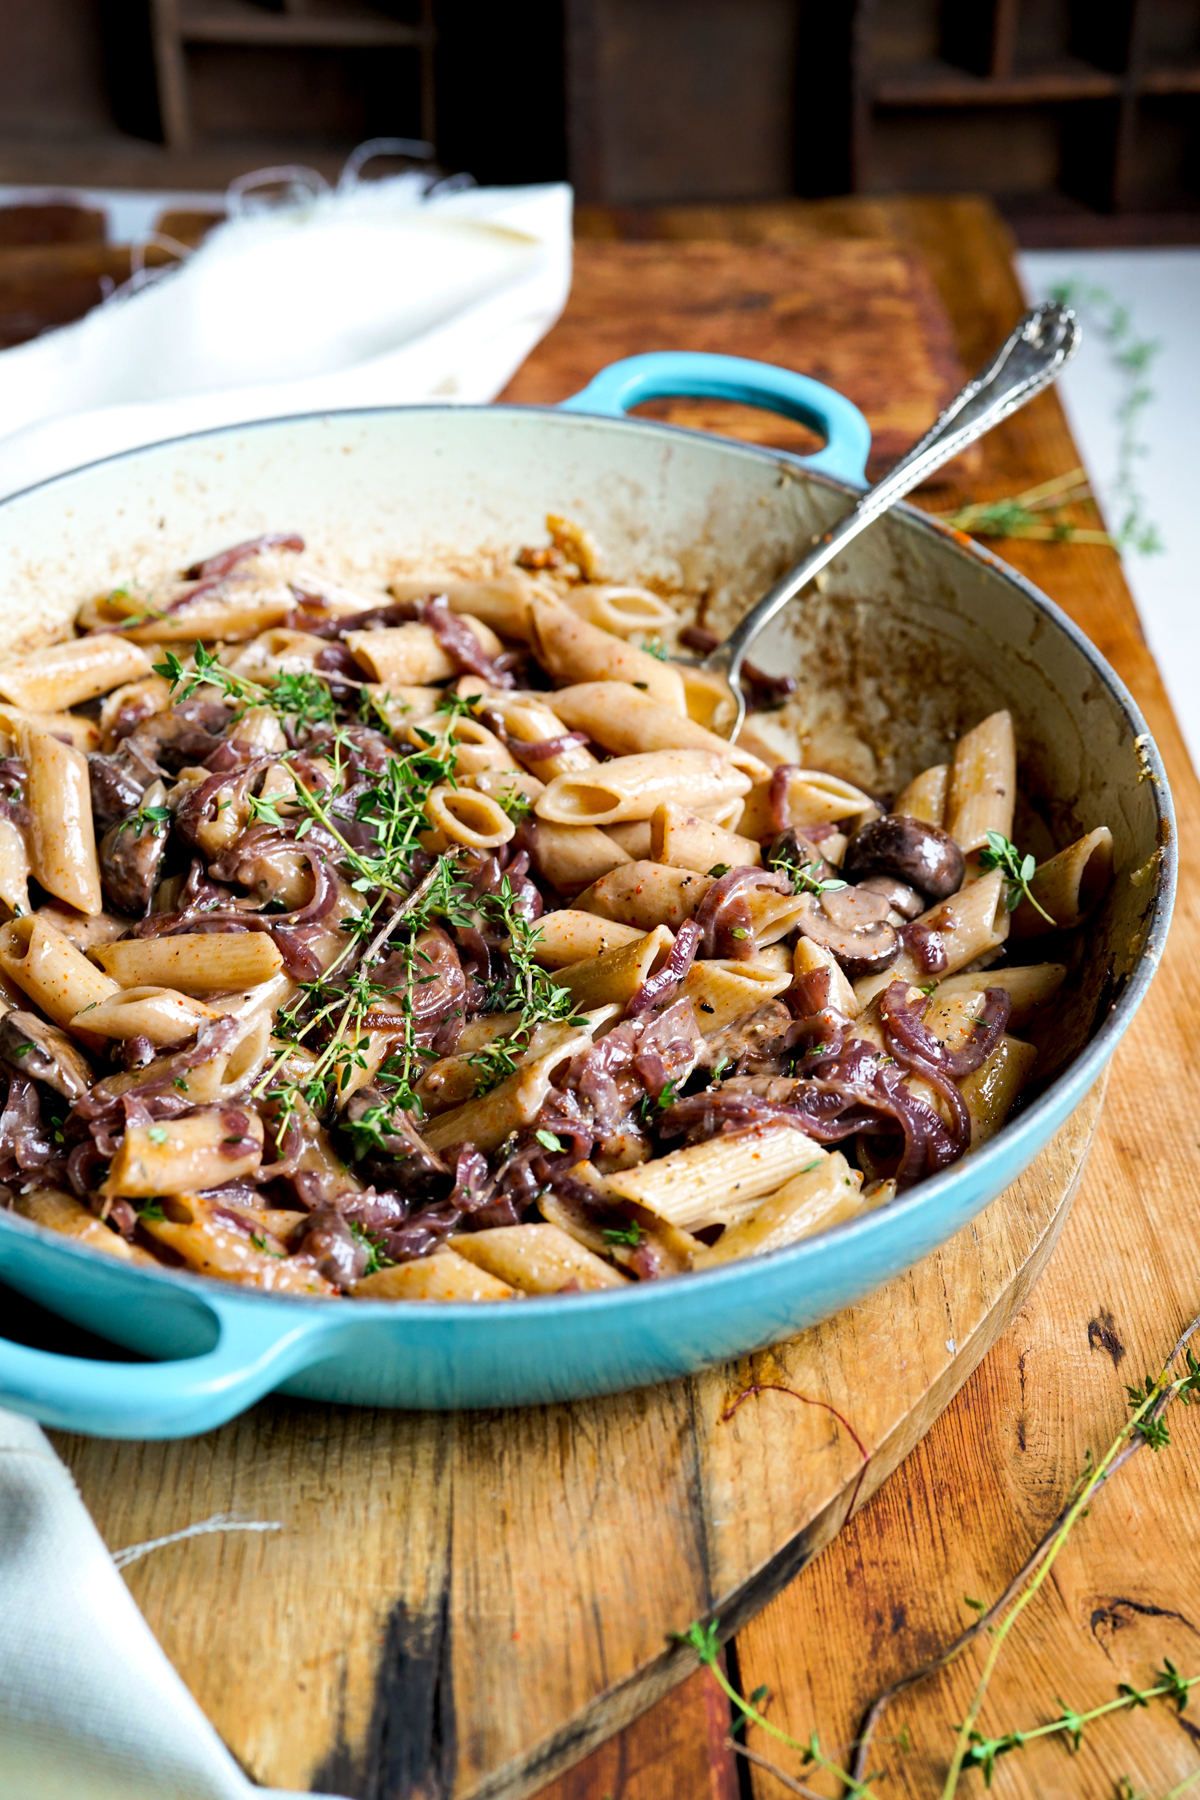 Tasty rustic french onion and mushroom dish recipe in cast iron pan